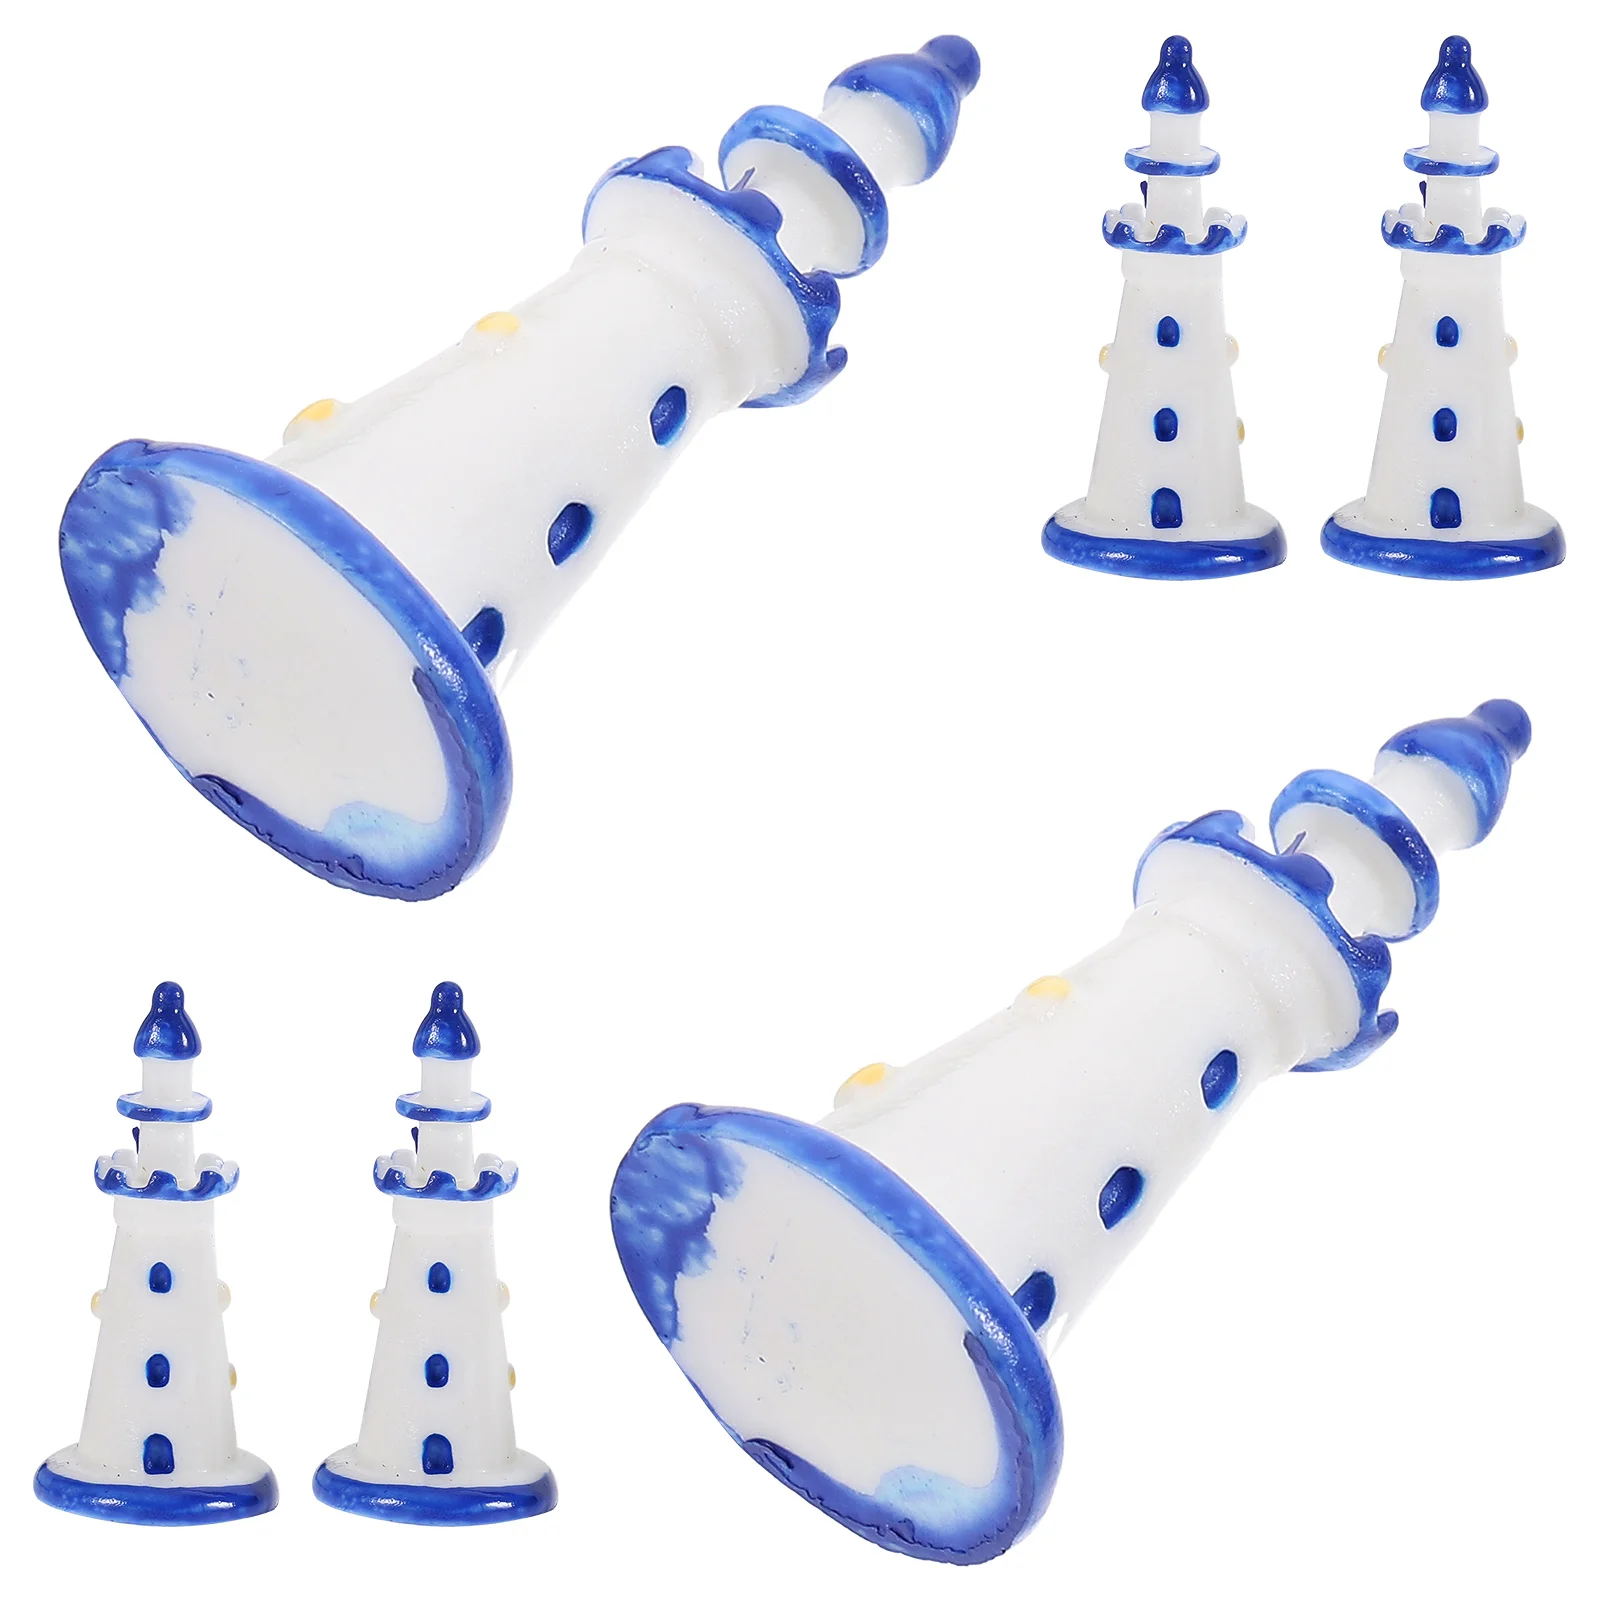 10 Pcs Household Mini Lighthouse Home Decor Scenery Decorations Resin Photography Props